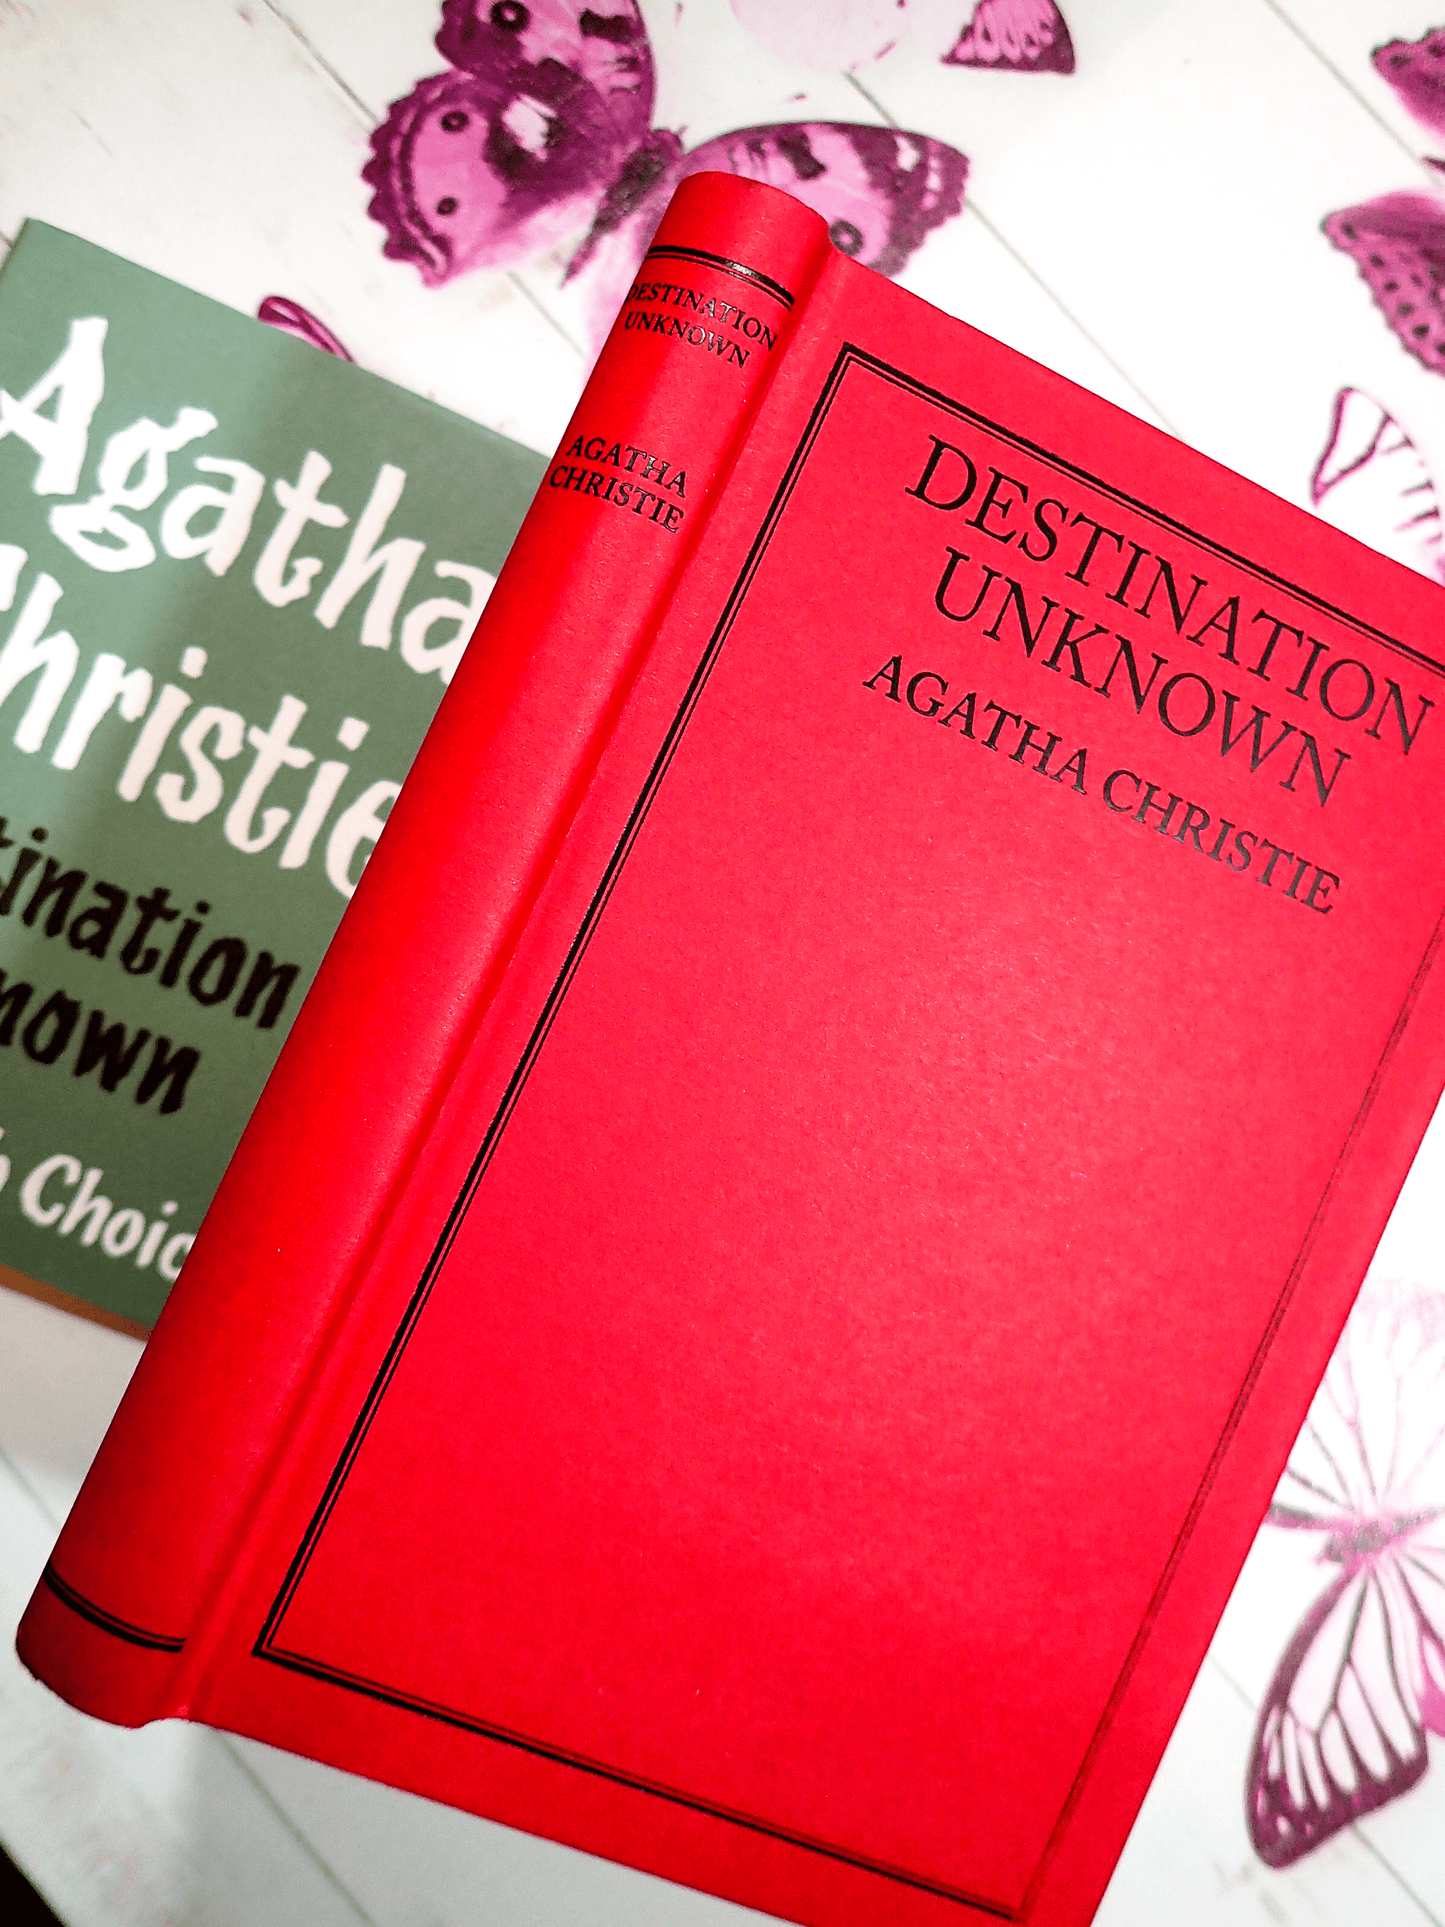 Destination Unknown Agatha Christie Hardback Facsimile Vintage book front cover showing scarlet boards and black titles to the spine. 